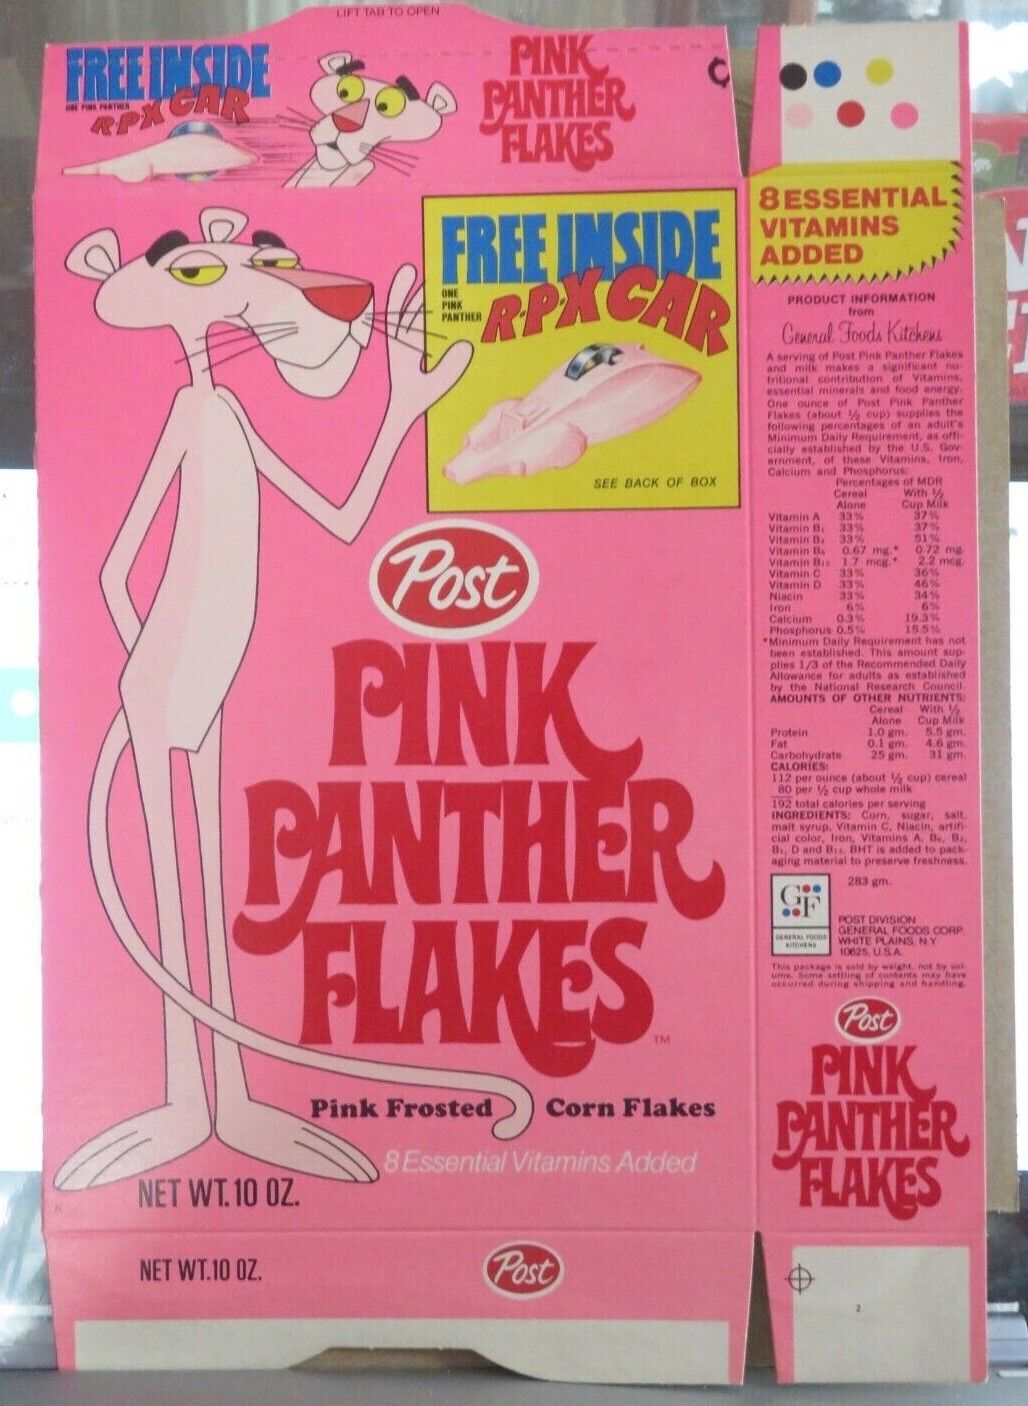 Post Iconic Pink Panther Flakes Cereal Box 1972- Unused - Mint Flat Rare Old